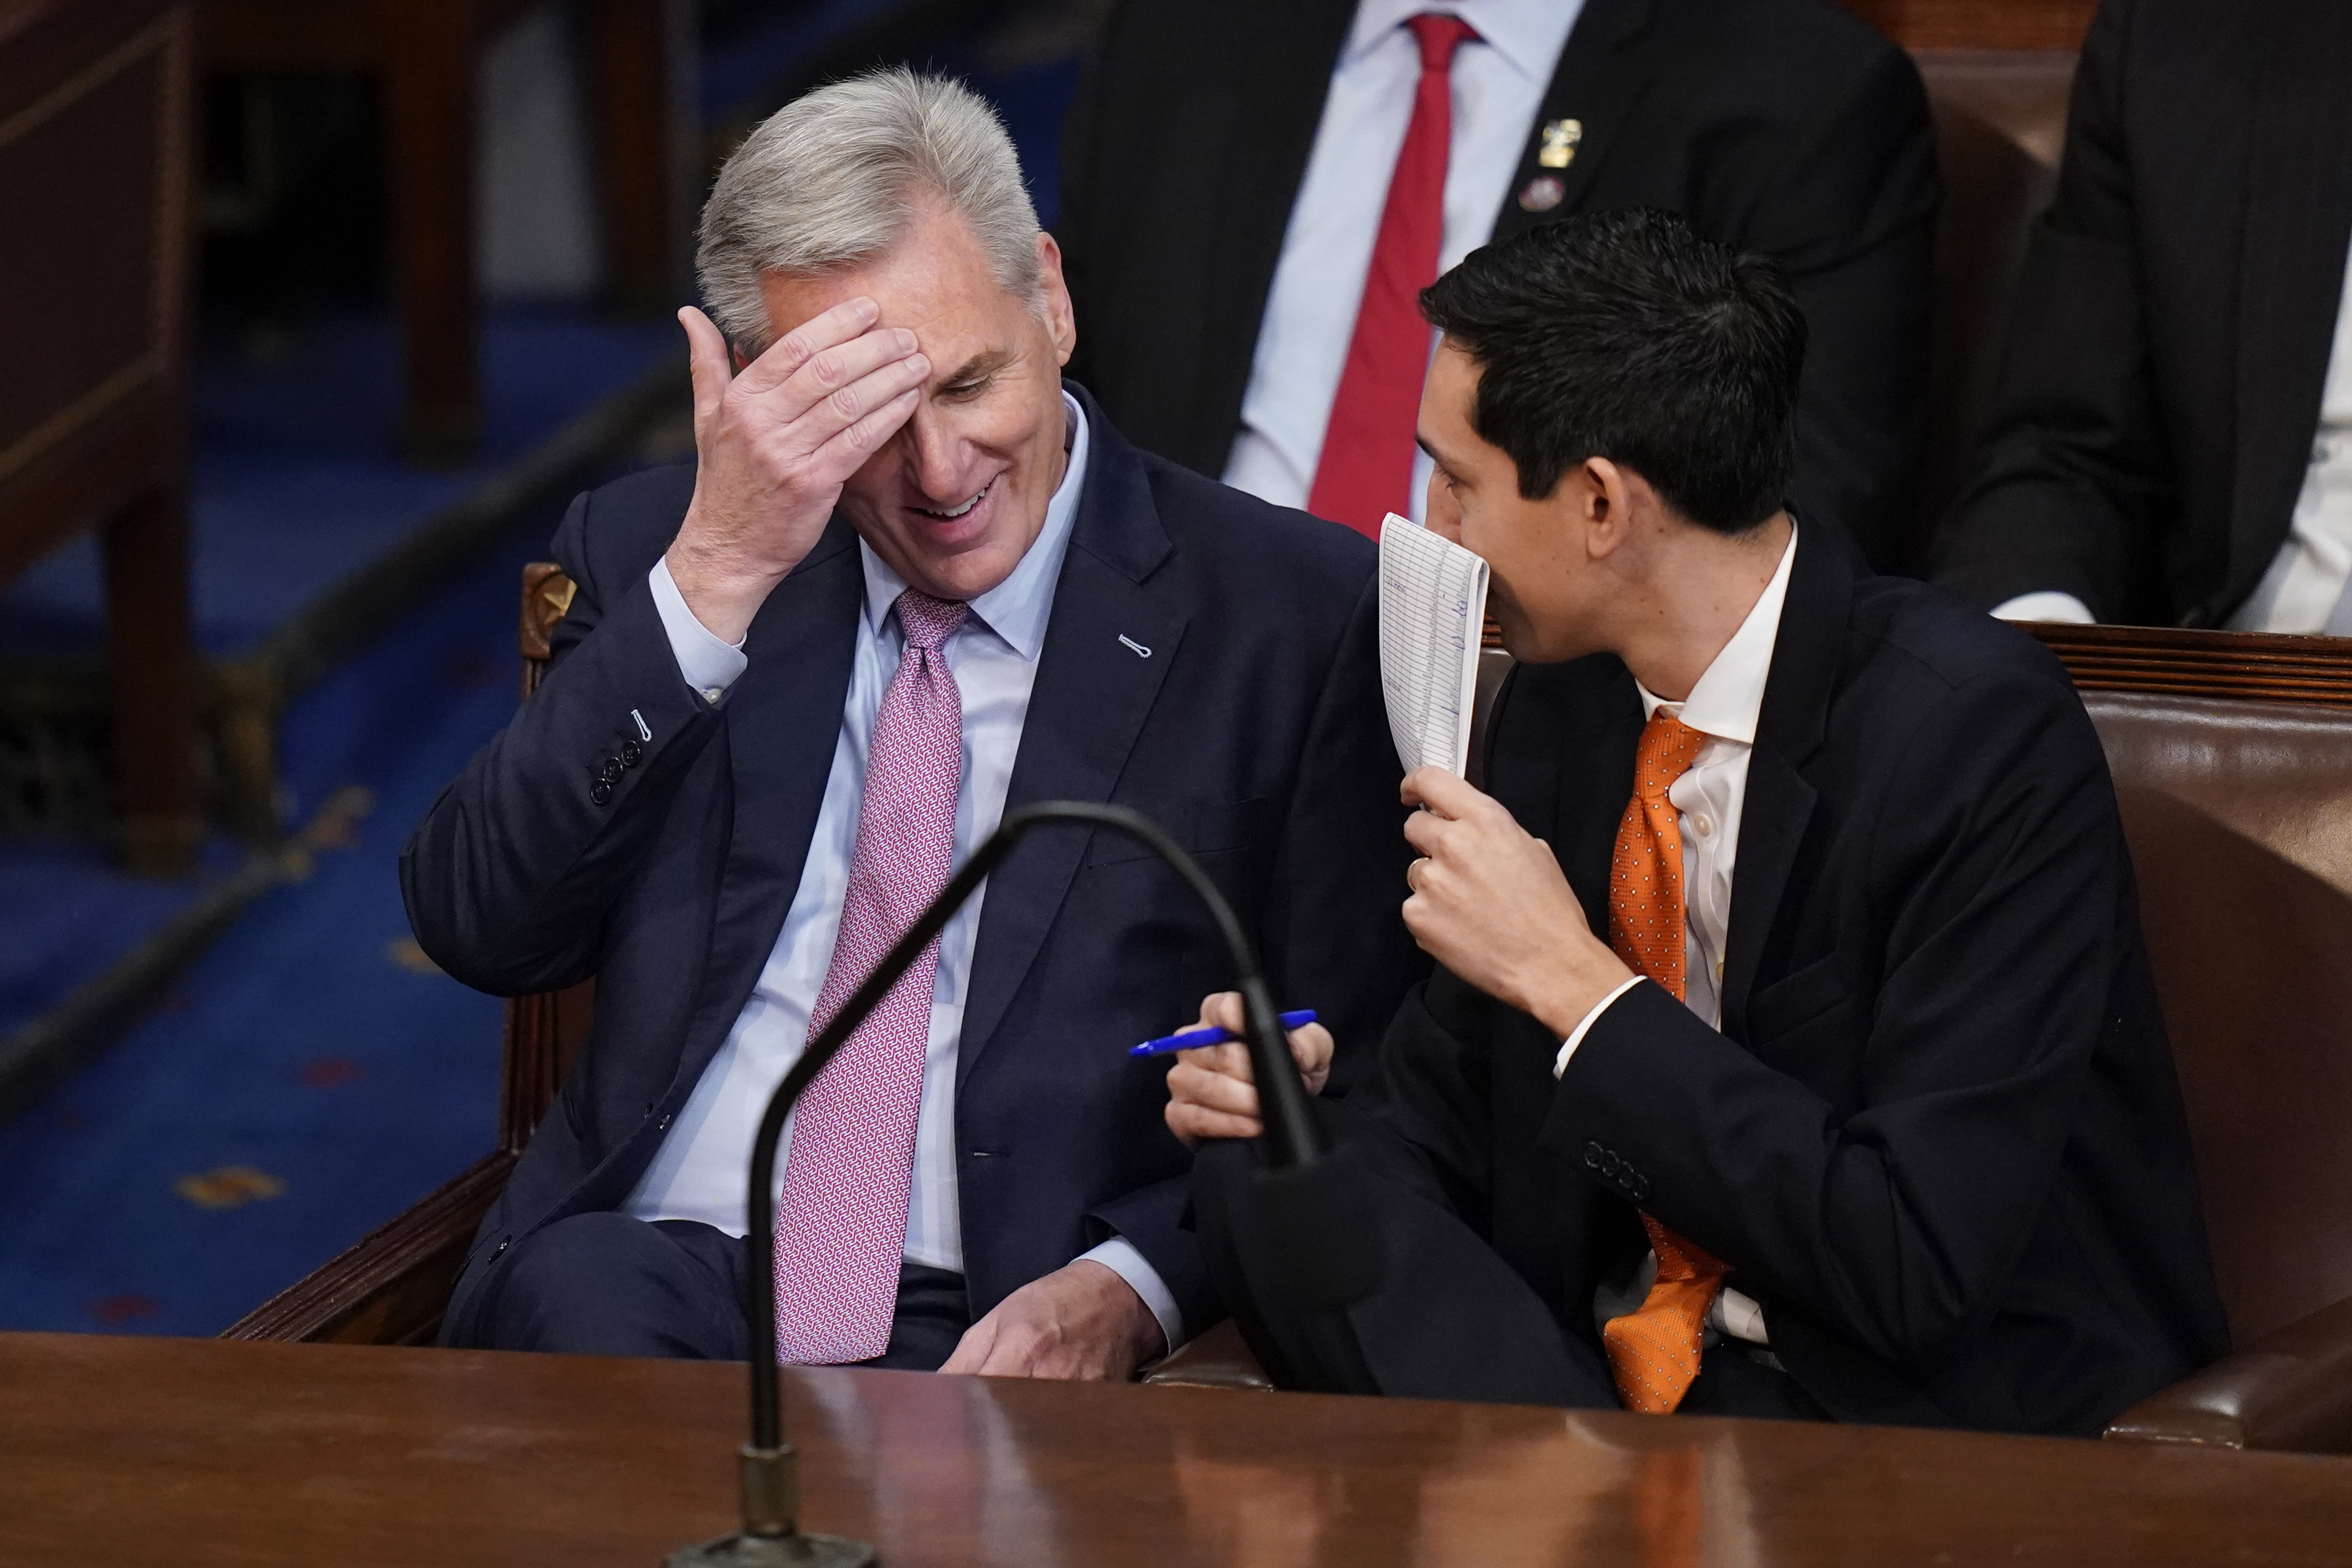 Kevin McCarthy wins House speaker after 15 votes and a mess of